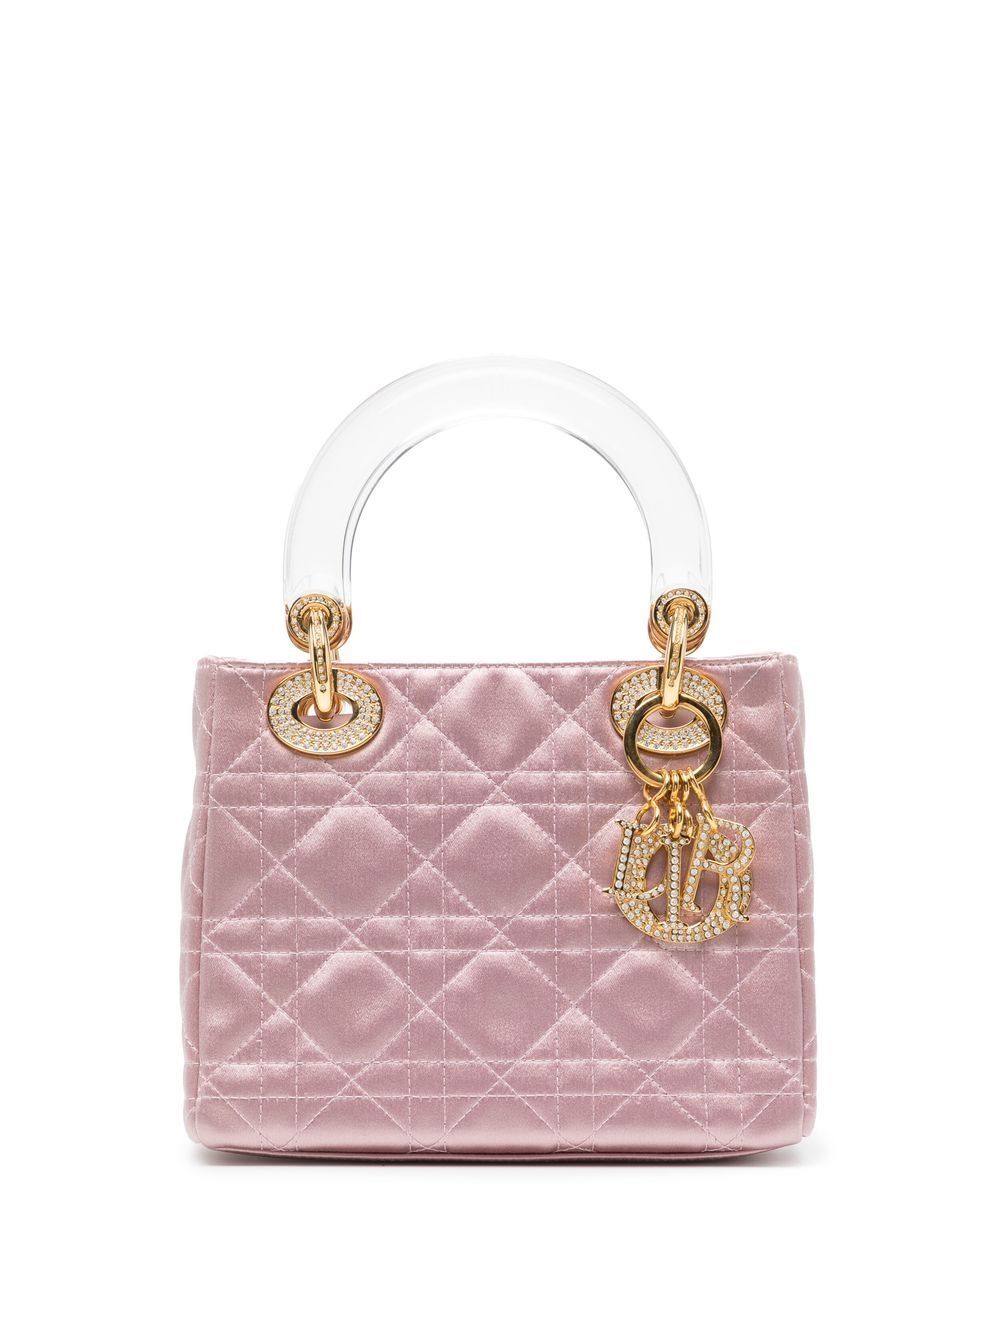 Christian Dior 1999 pre-owned mini Lady Dior bag - Pink